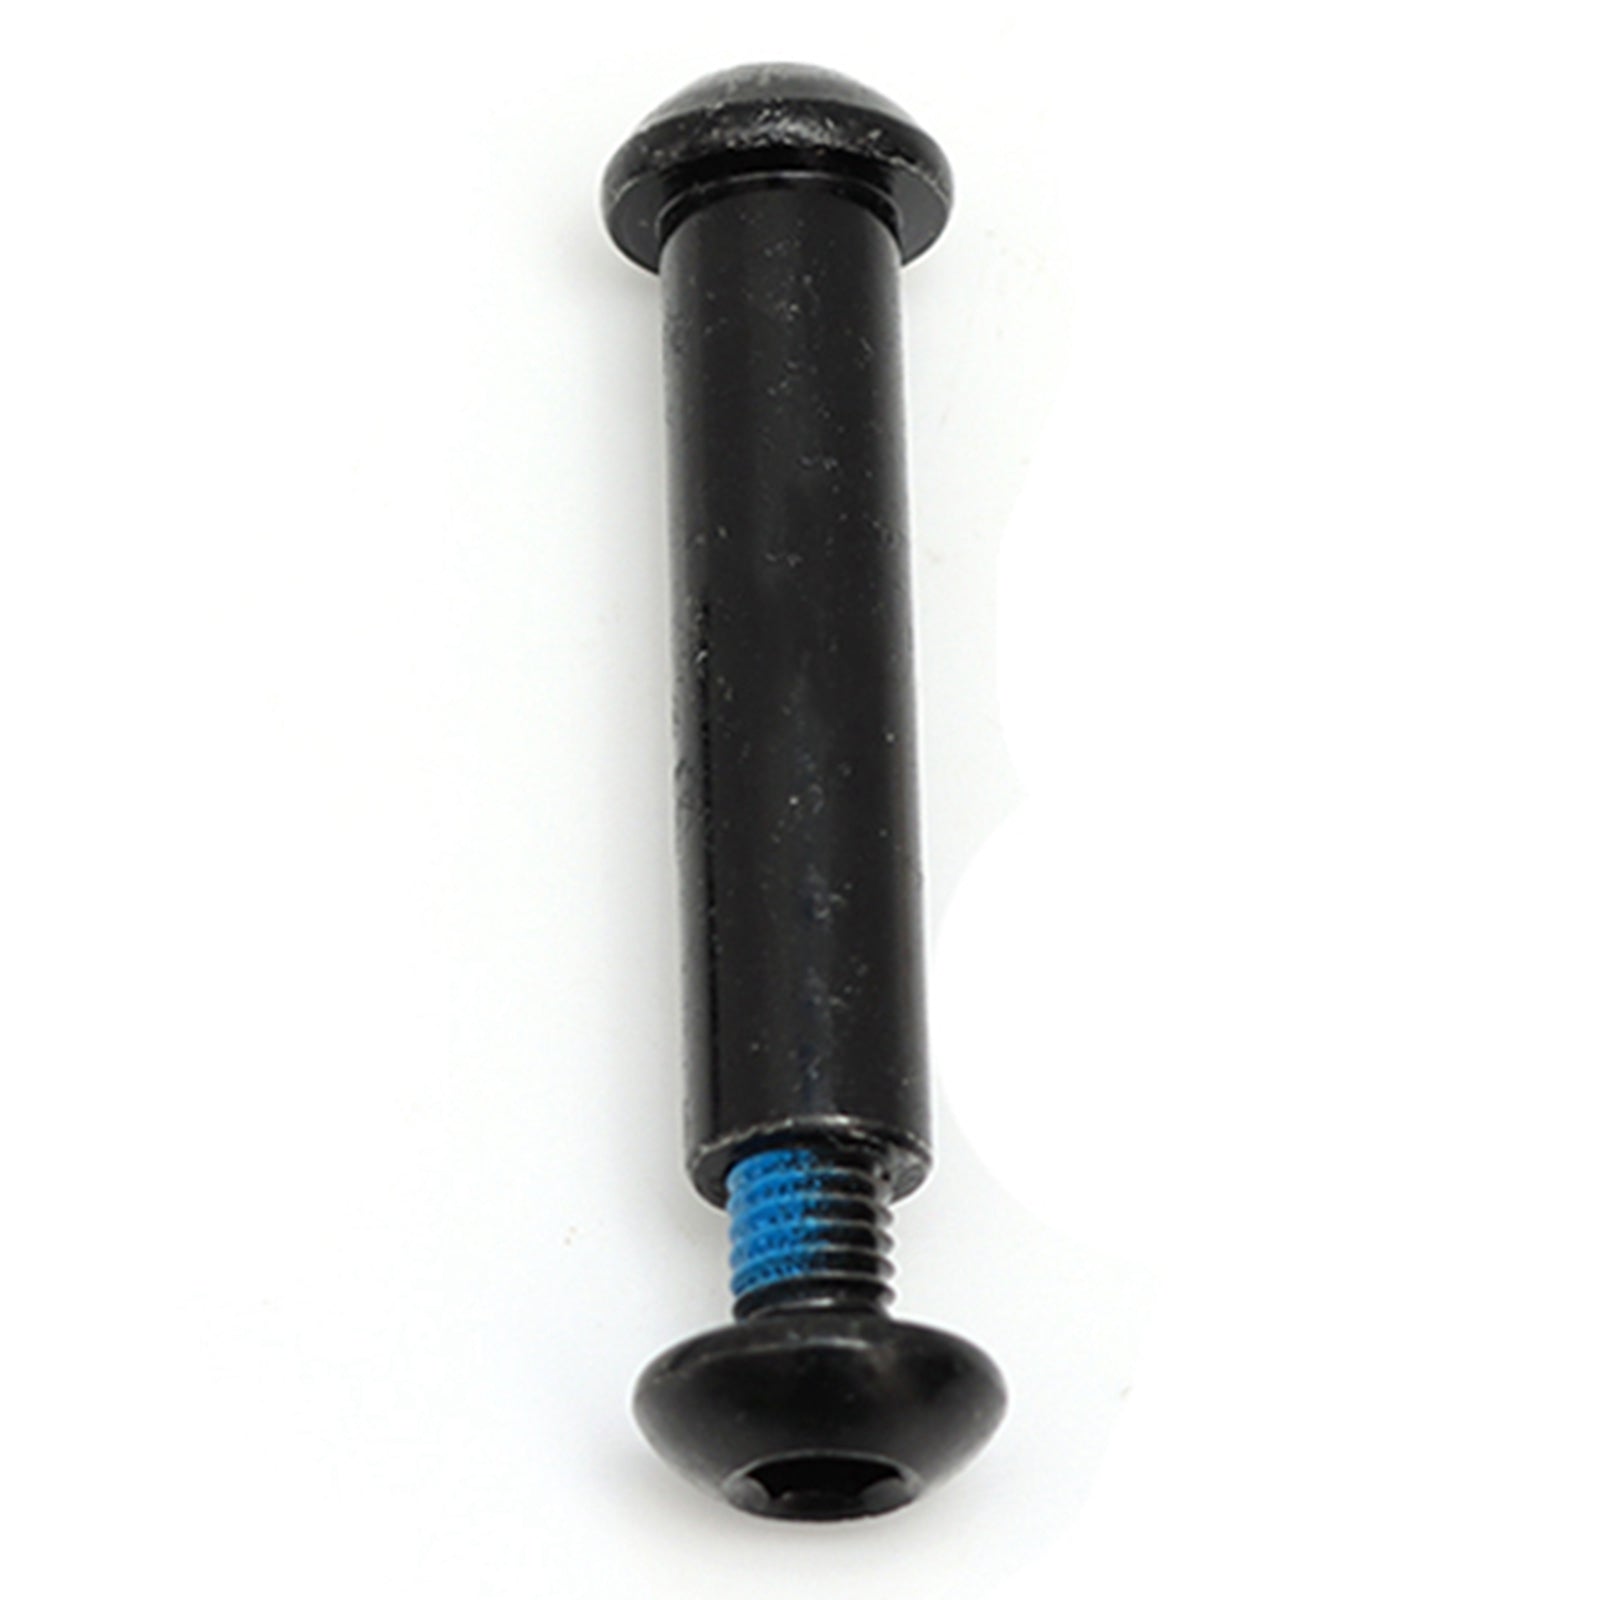 Uniqkart for Ninebot MAX G30 Electric Scooter Fold Base Fixed Bolt Replacement Screw Part - S